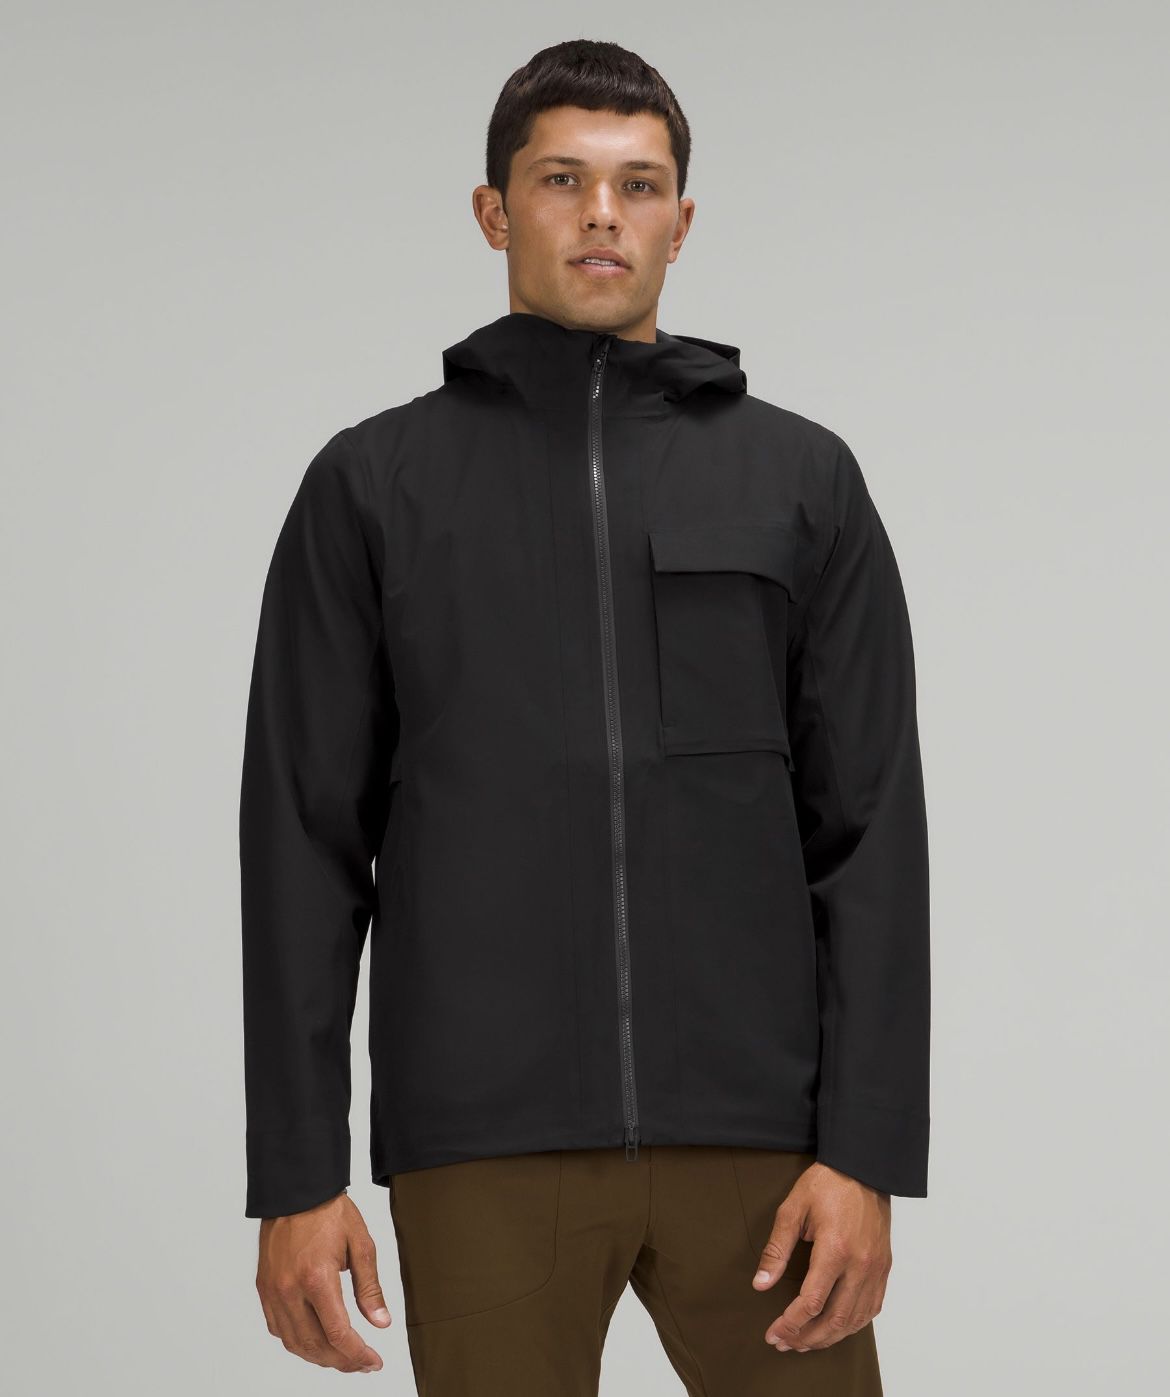 NWT Lululemon Men’s Outpour StretchSeal Jacket in Black